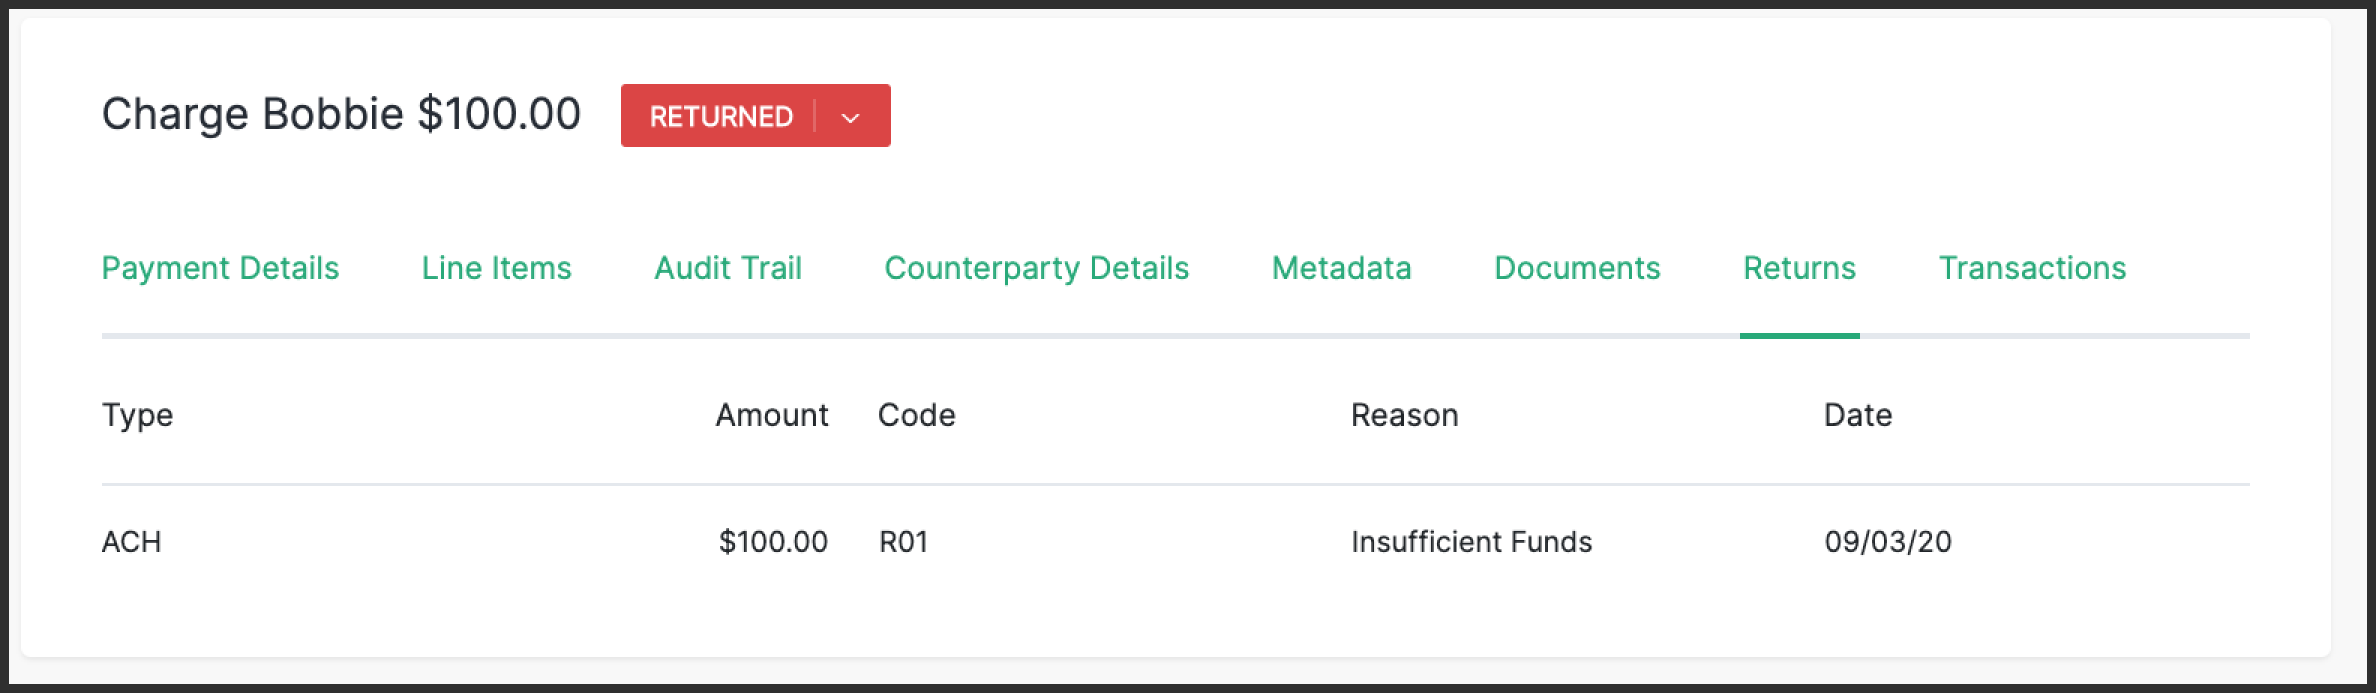 Returned payments interface